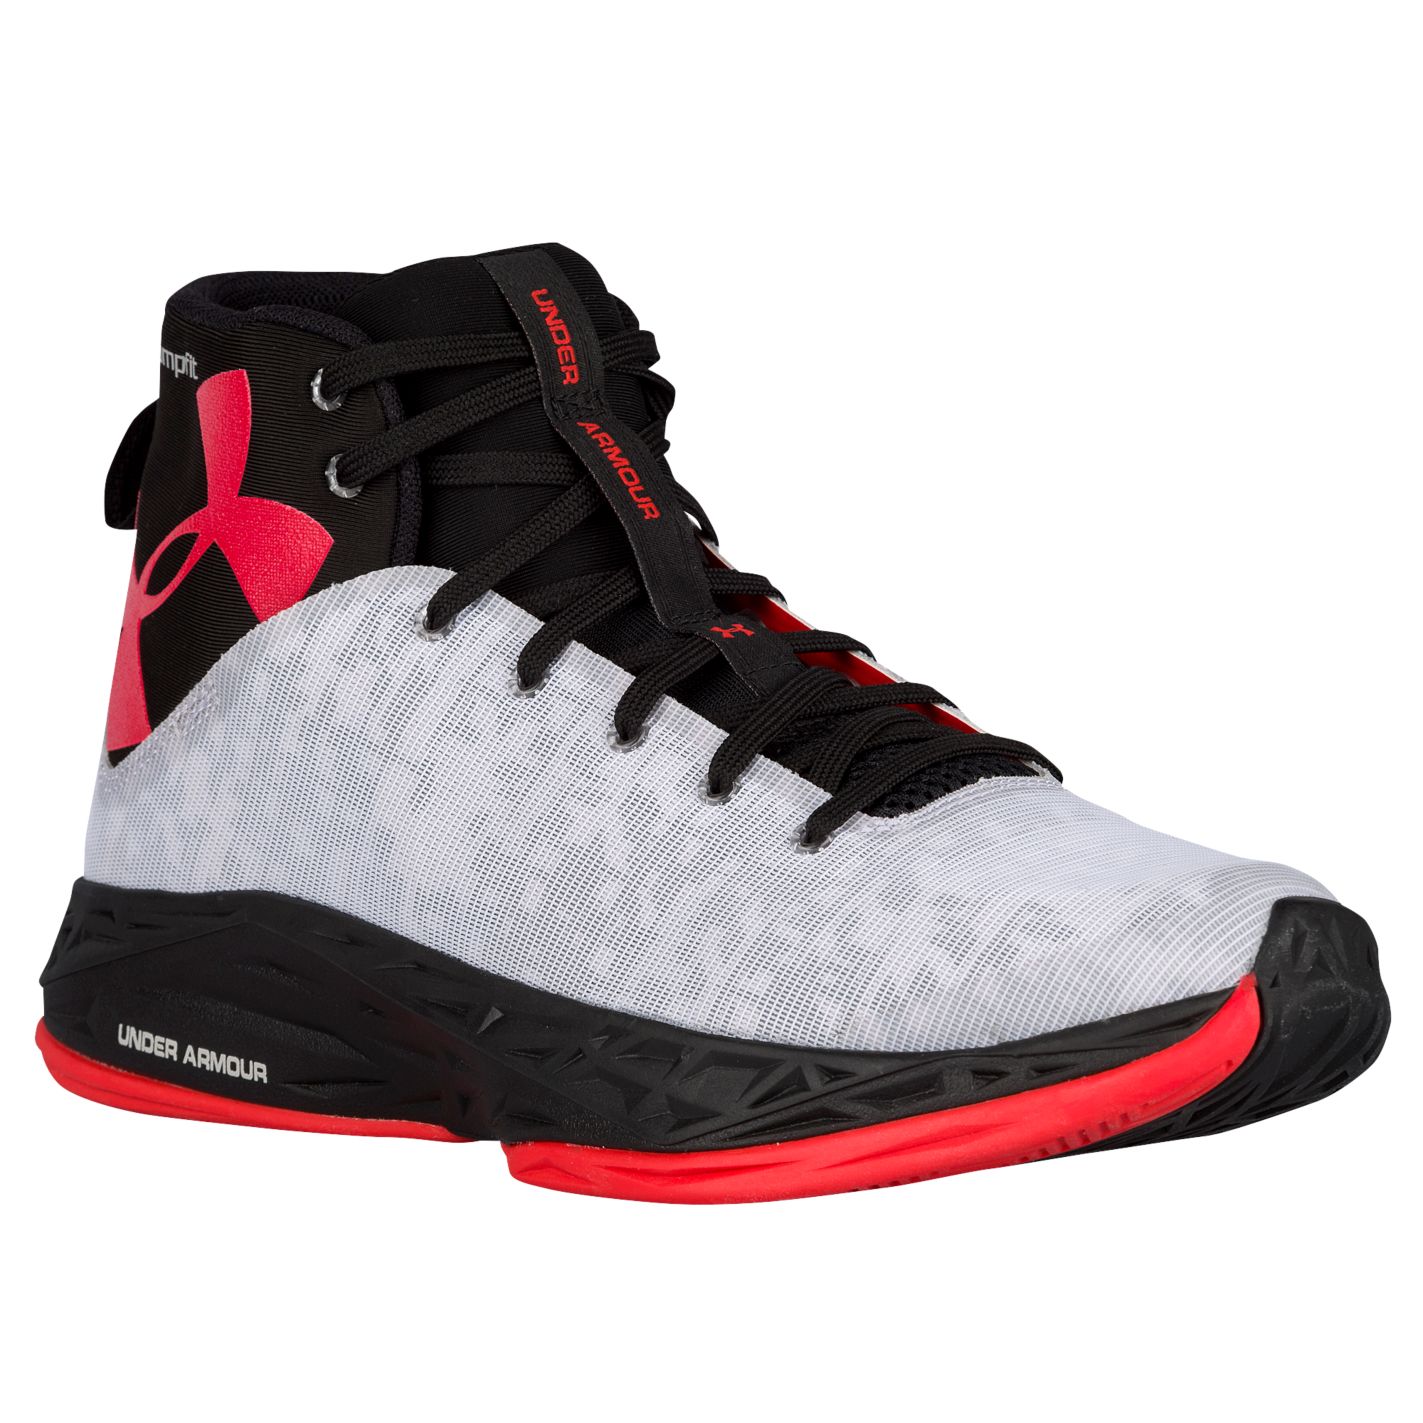 The Under Armour Fire Shot is Available Now 1